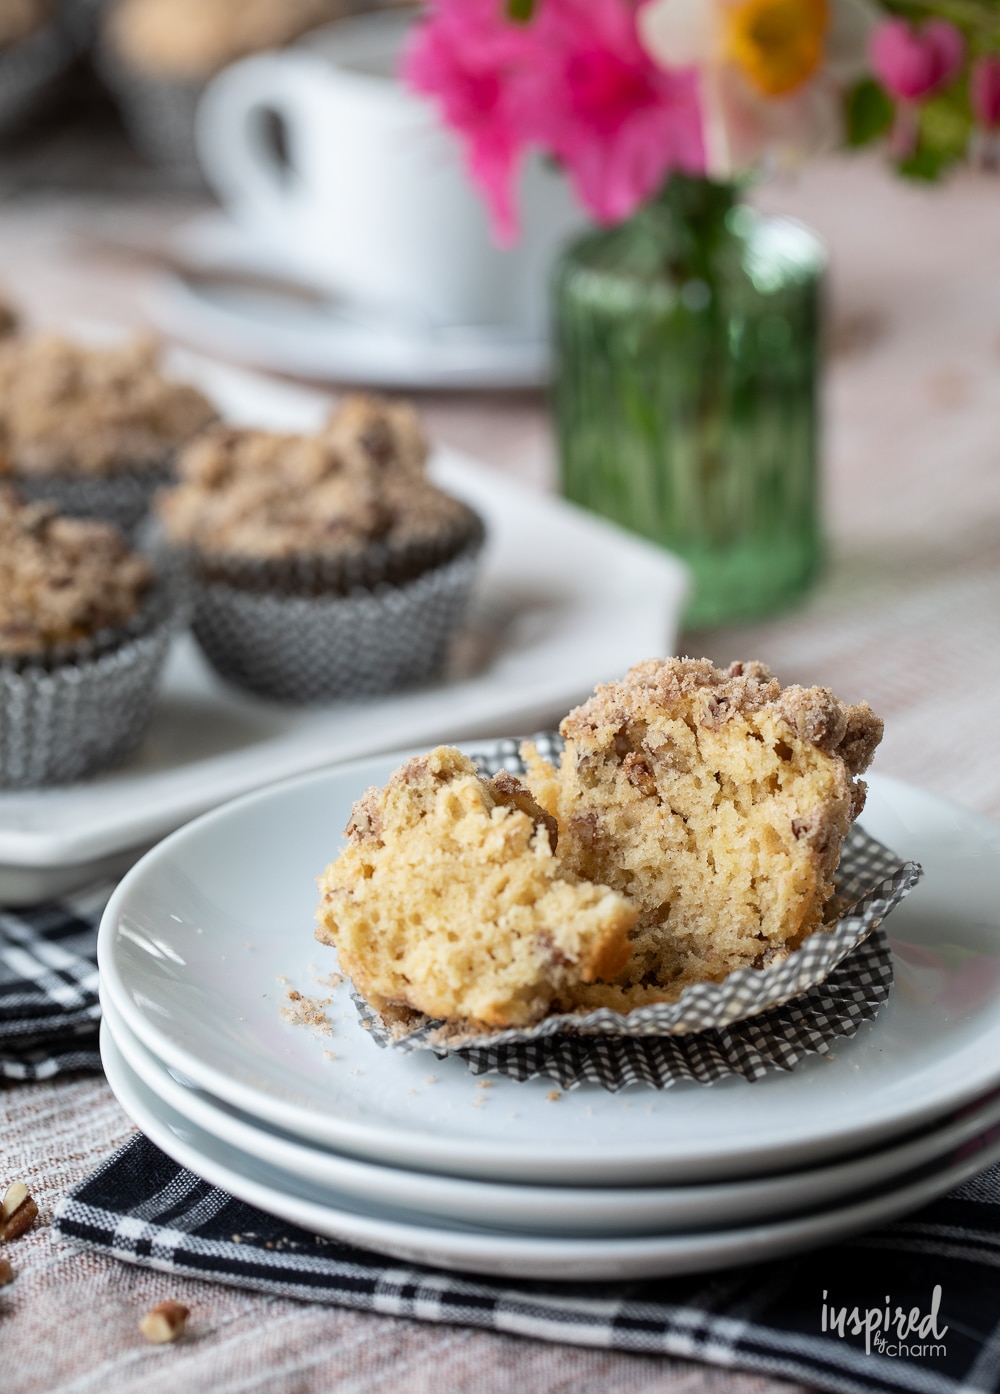 cinnamon maple morning muffins served on a platter with a single muffin cut in half on a plate.